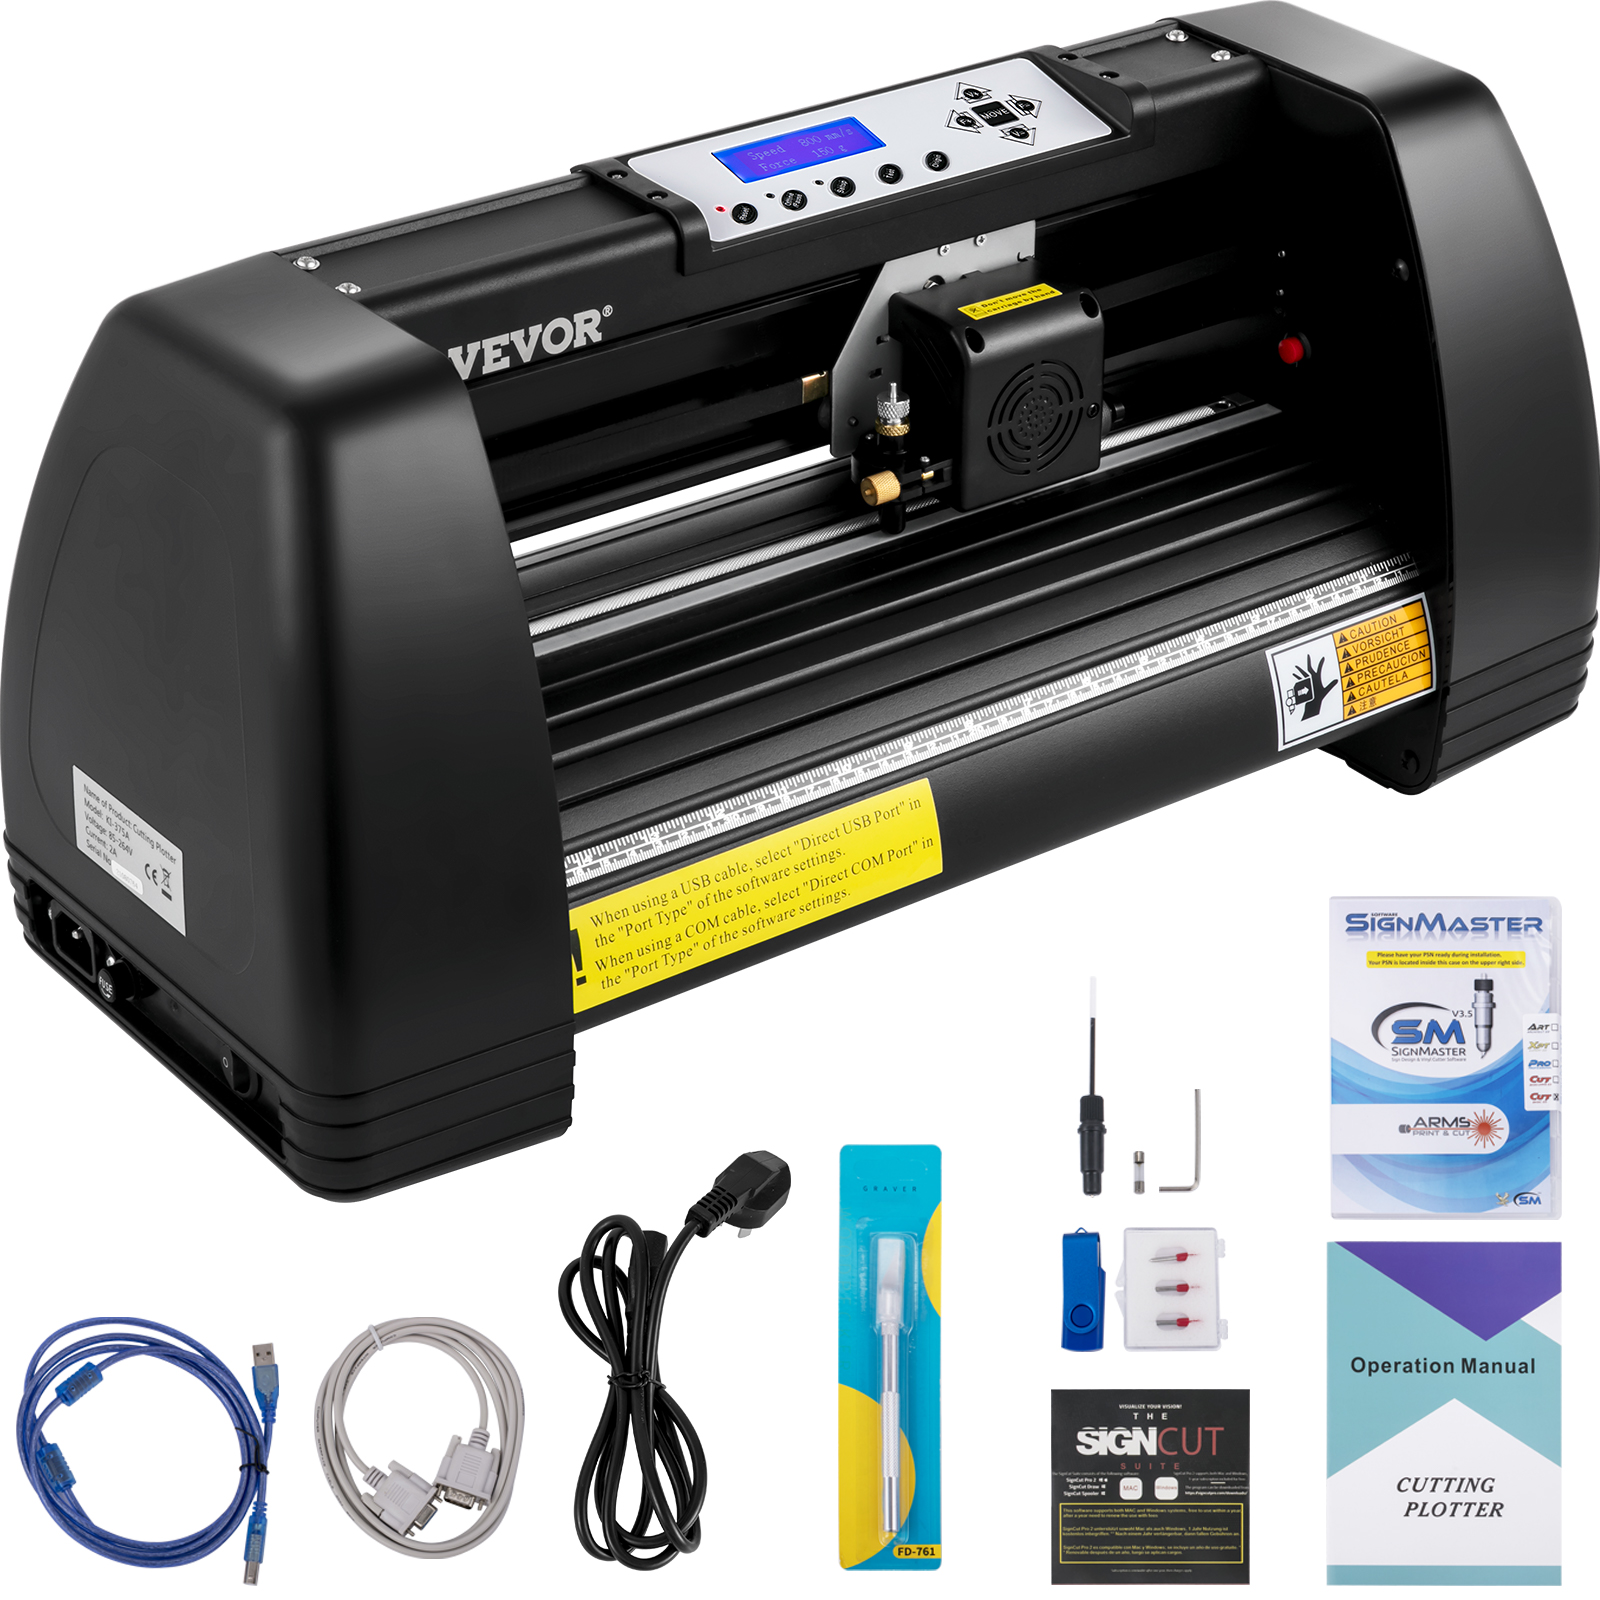 VEVOR VEVOR Vinyl Cutter Machine, 14 Vinyl Plotter, LCD Display Plotter  Cutter, Three Adjustable Pinch Rollers Sign Cutting Plotter, Vinyl Cutter  with SignCut and Signmaster Software for Design and Cut